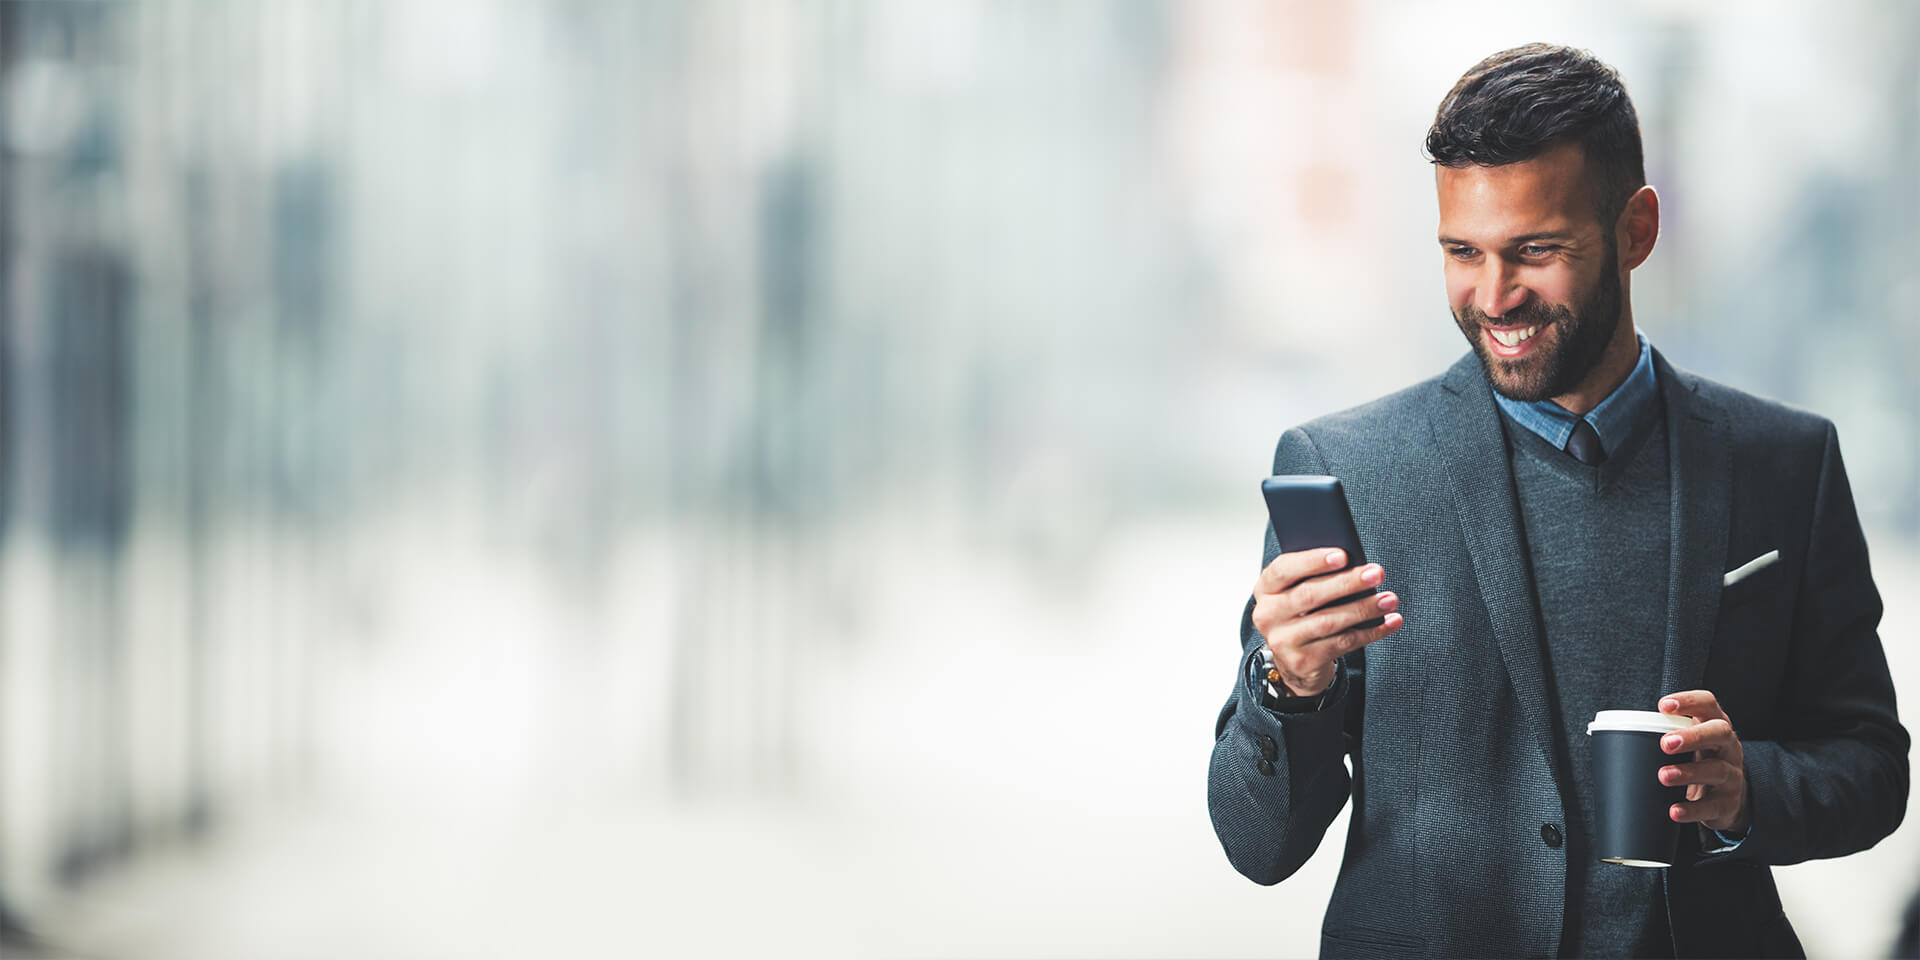 A businessman is holding a cup of coffee and confidently looking at his business checking account on his mobile device